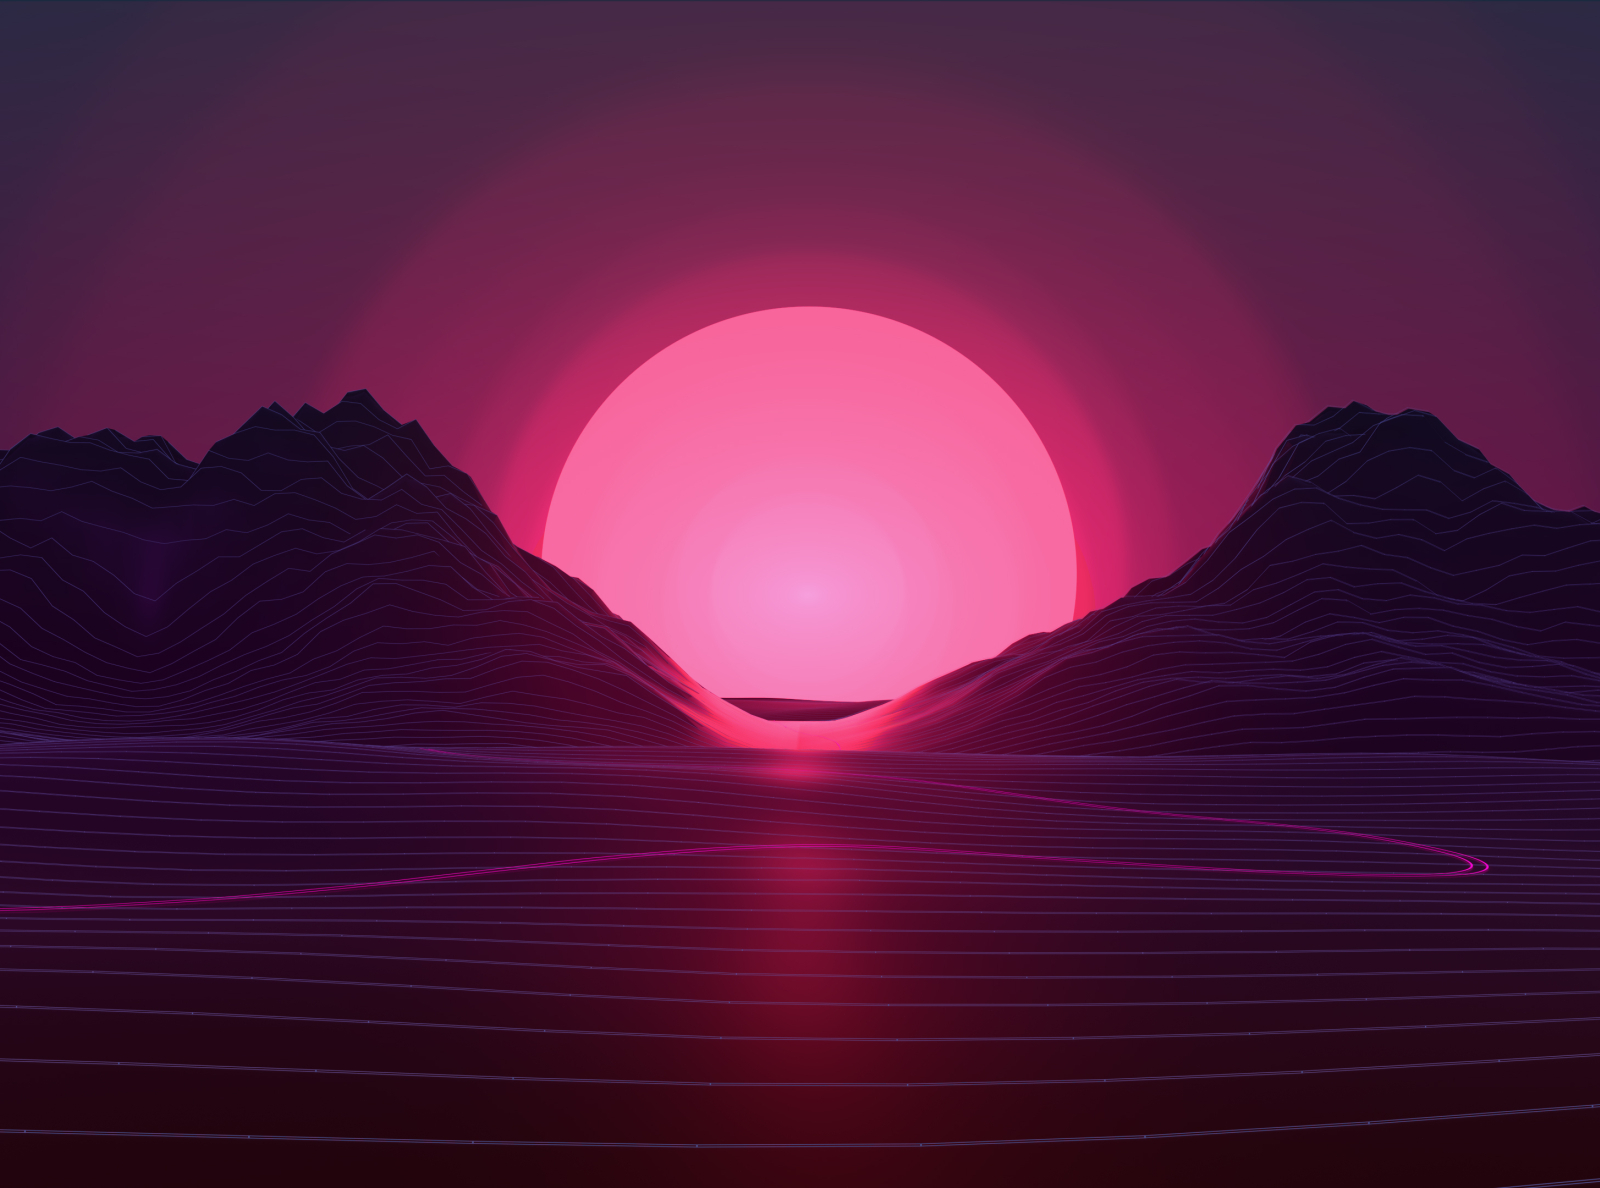 Neon Sunset by Axiom Design on Dribbble